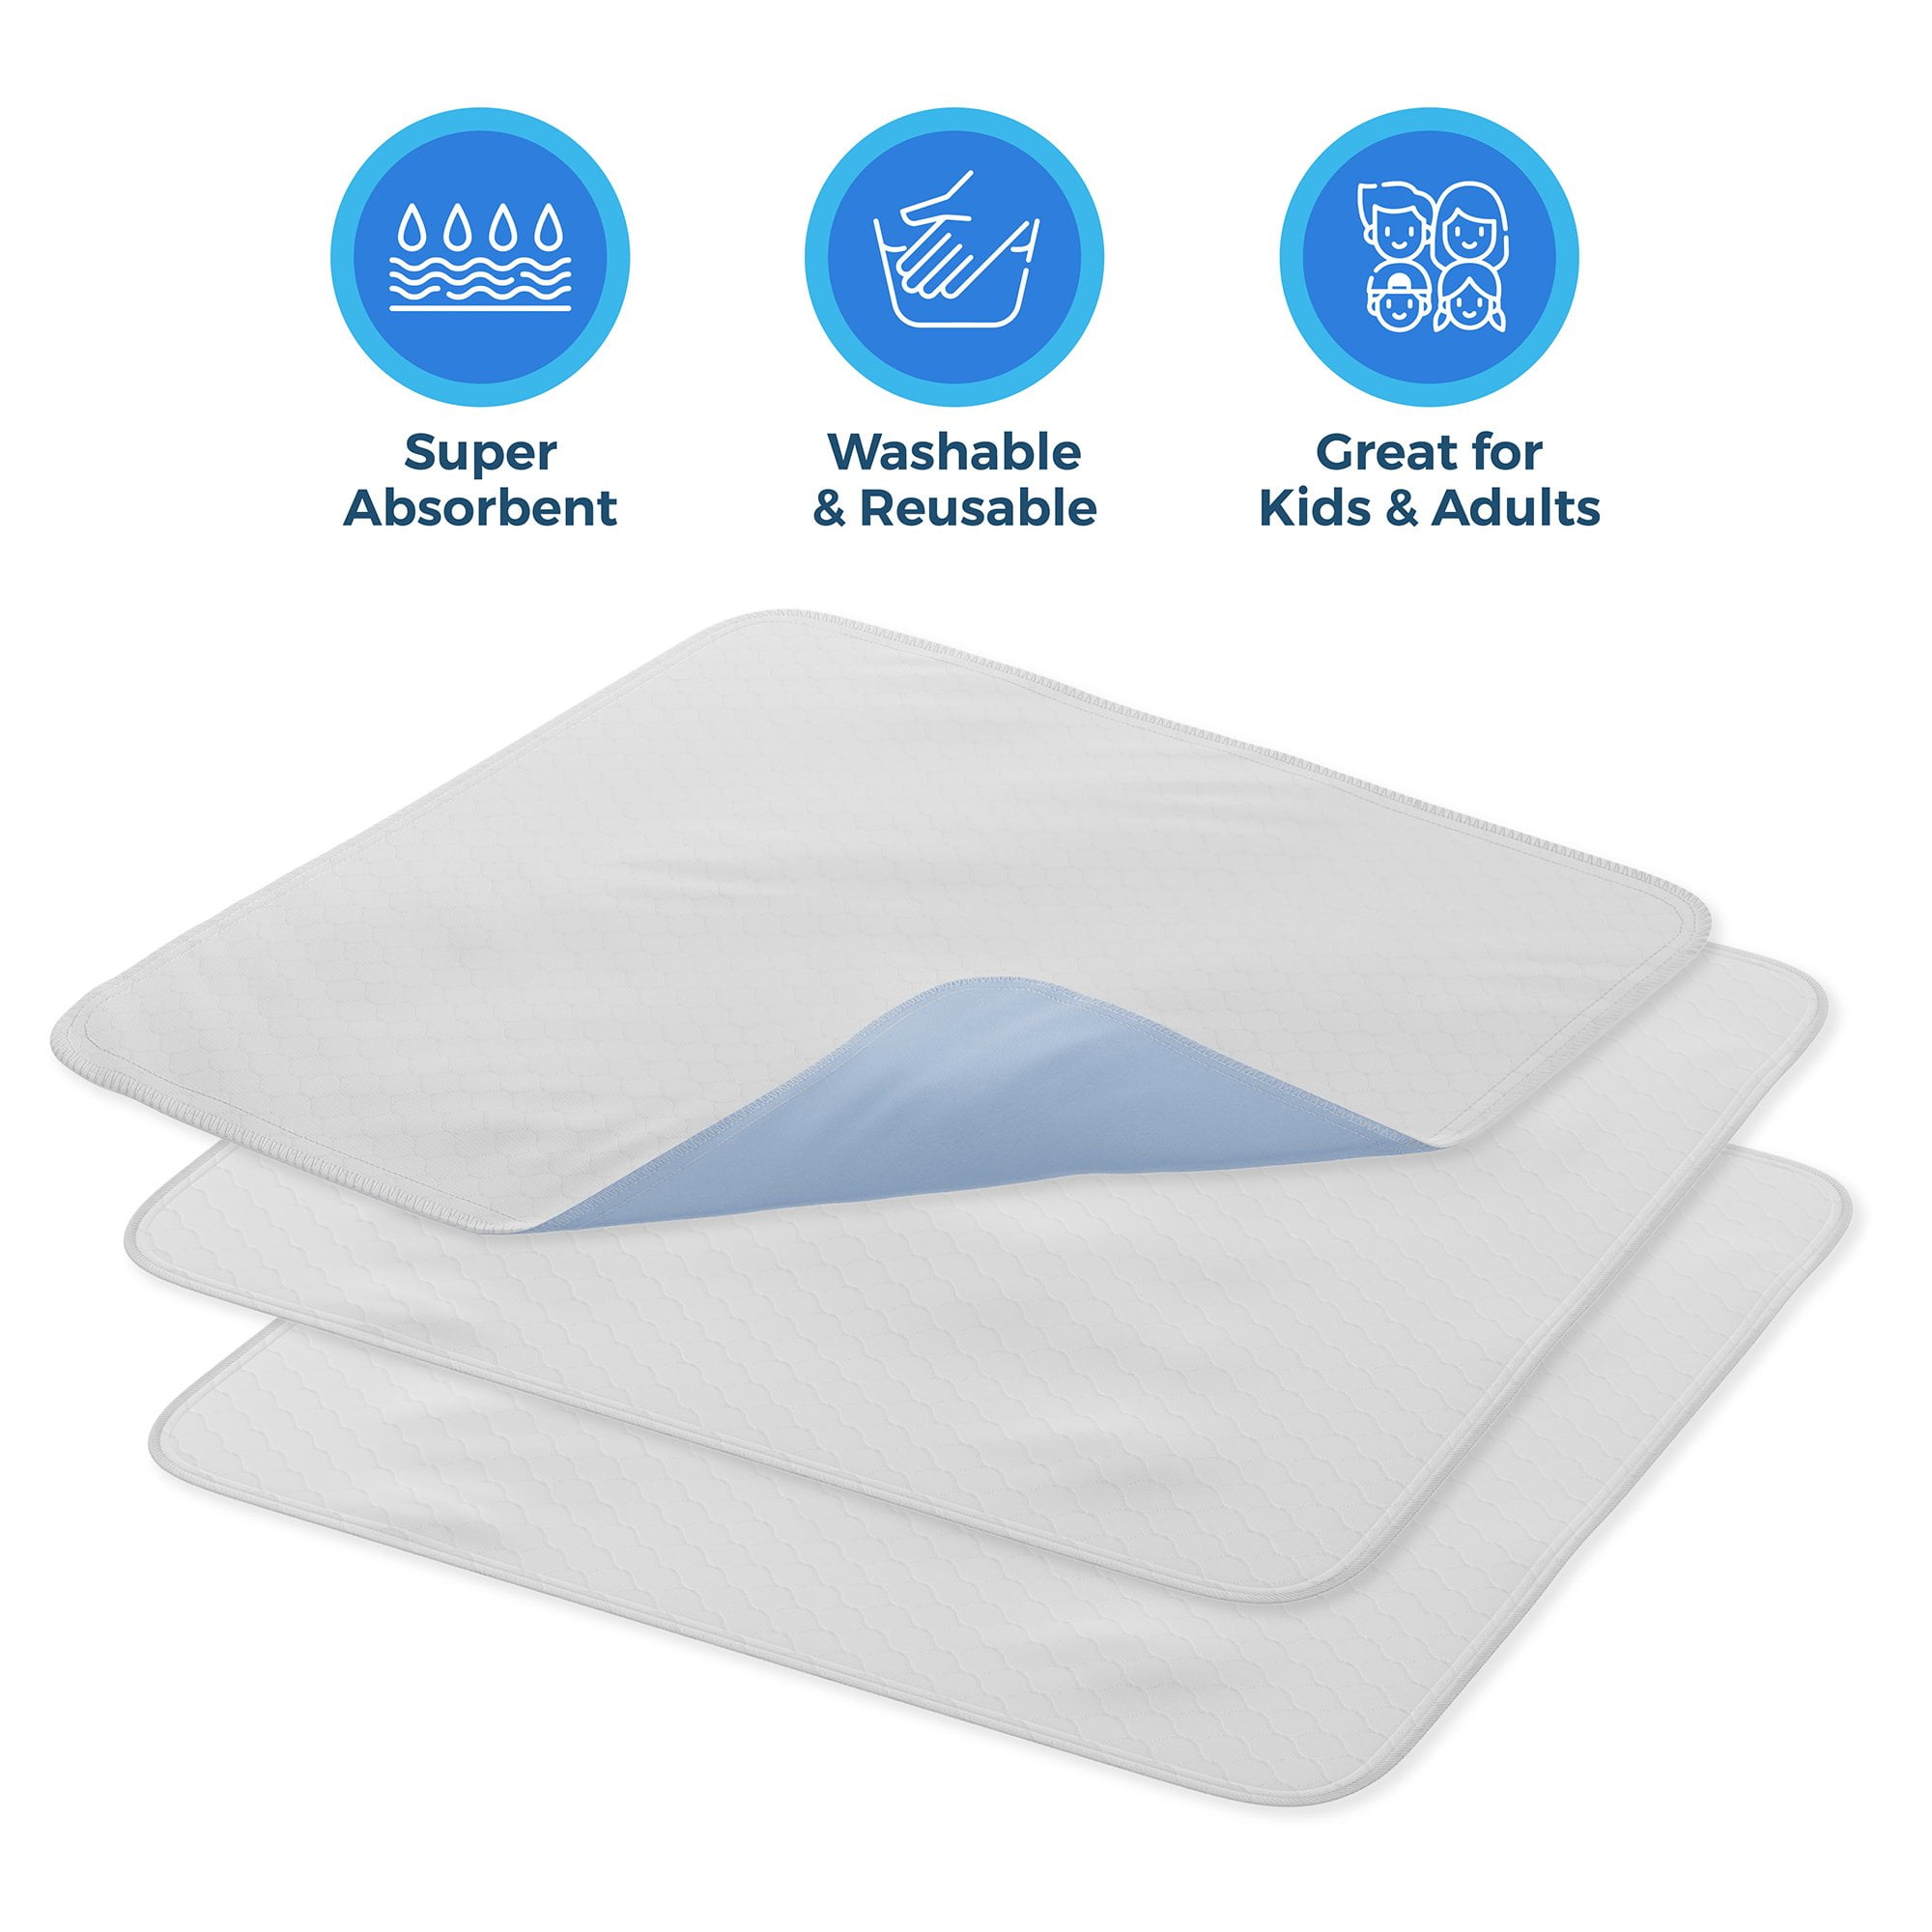 Waterproof Bed Pads 34x36 2 Pack Absorbent Pads Non Slip for Incontinence  Reusable Bed Pads Waterproof Protective Pad for Seniors Bedwetting Kids  Hospitals Pets Gray Star 34x36 (2 Pack)